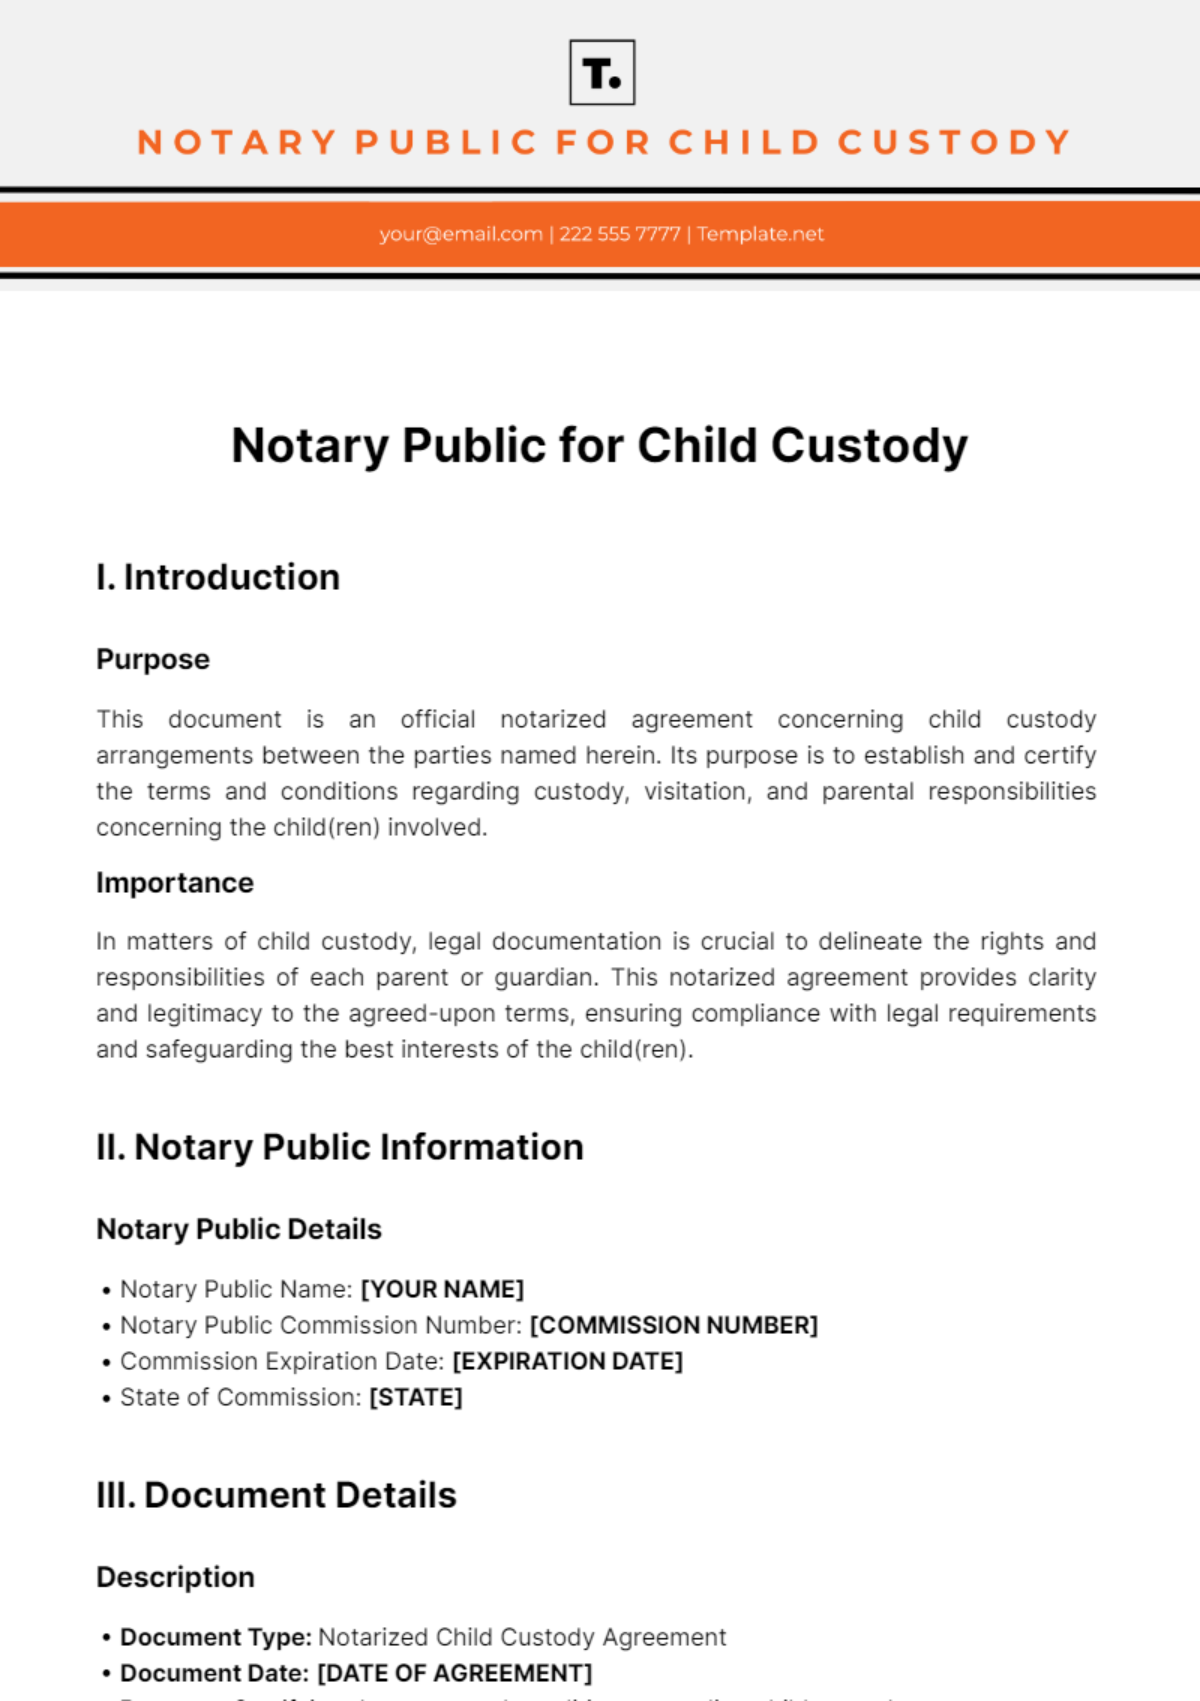 Notary Public For Child Custody Template